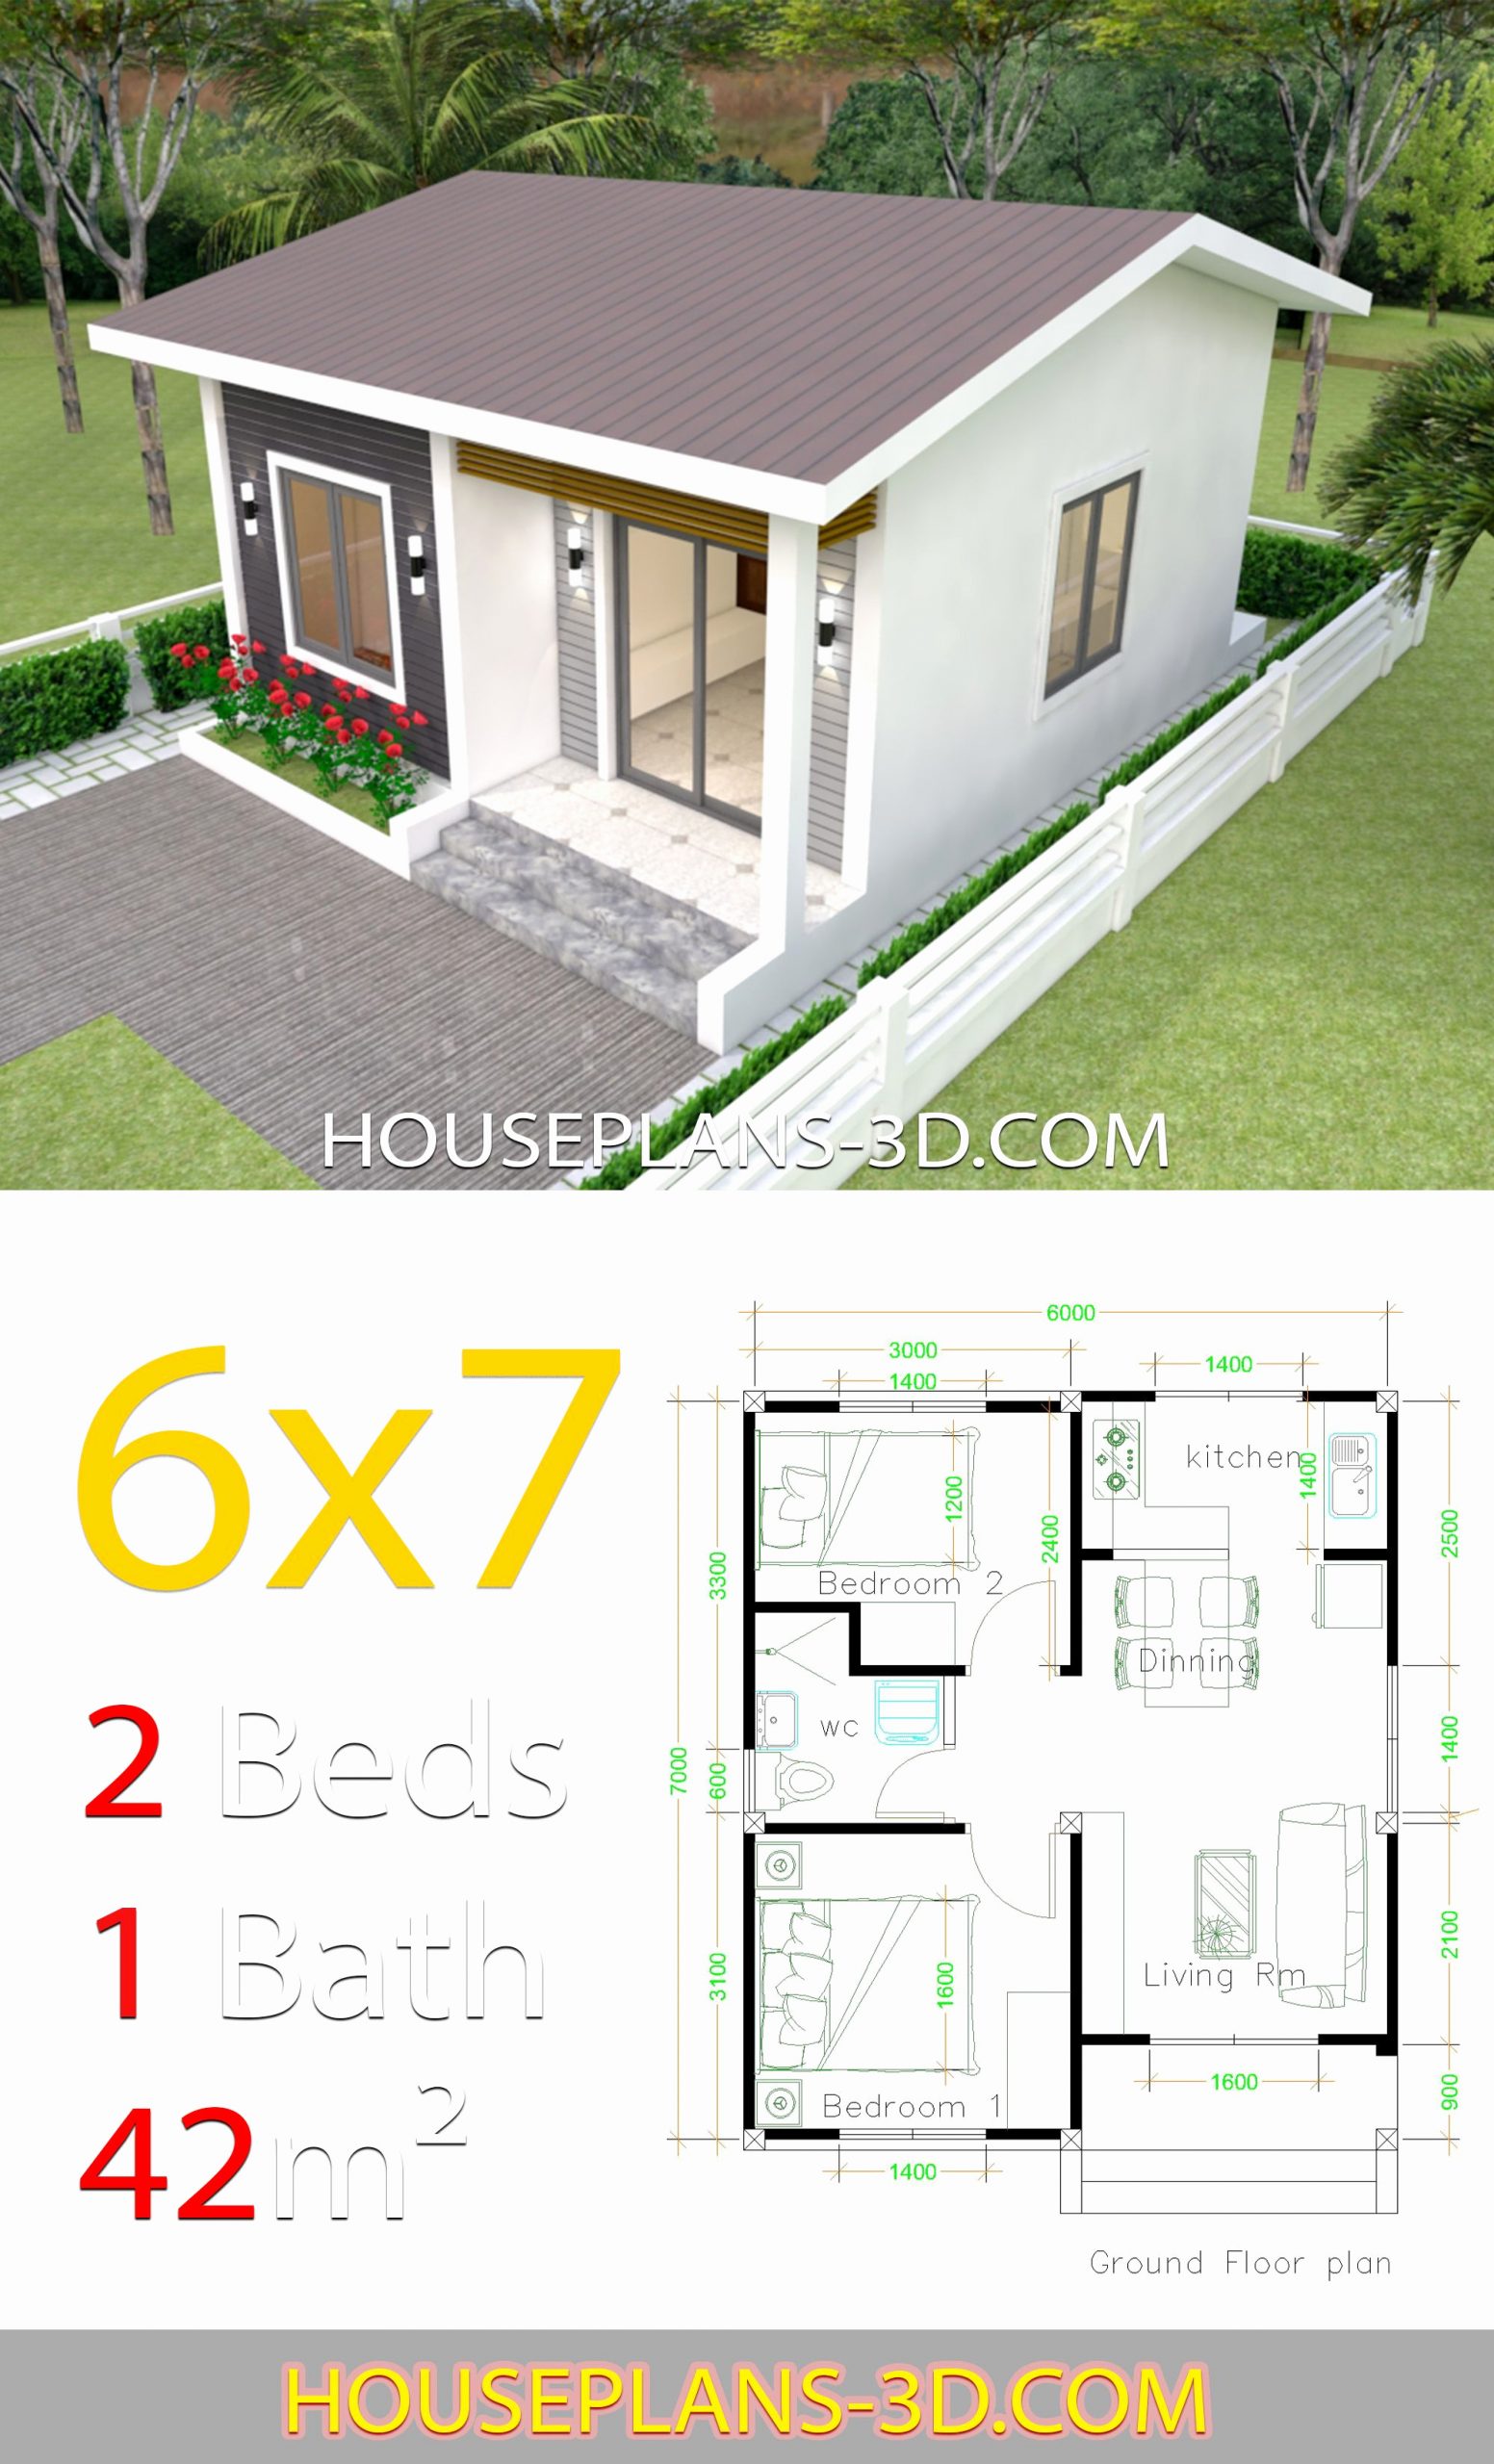 2 Bedroom House Plans Awesome House Design 6x7 with 2 Bedrooms House Plans 3d